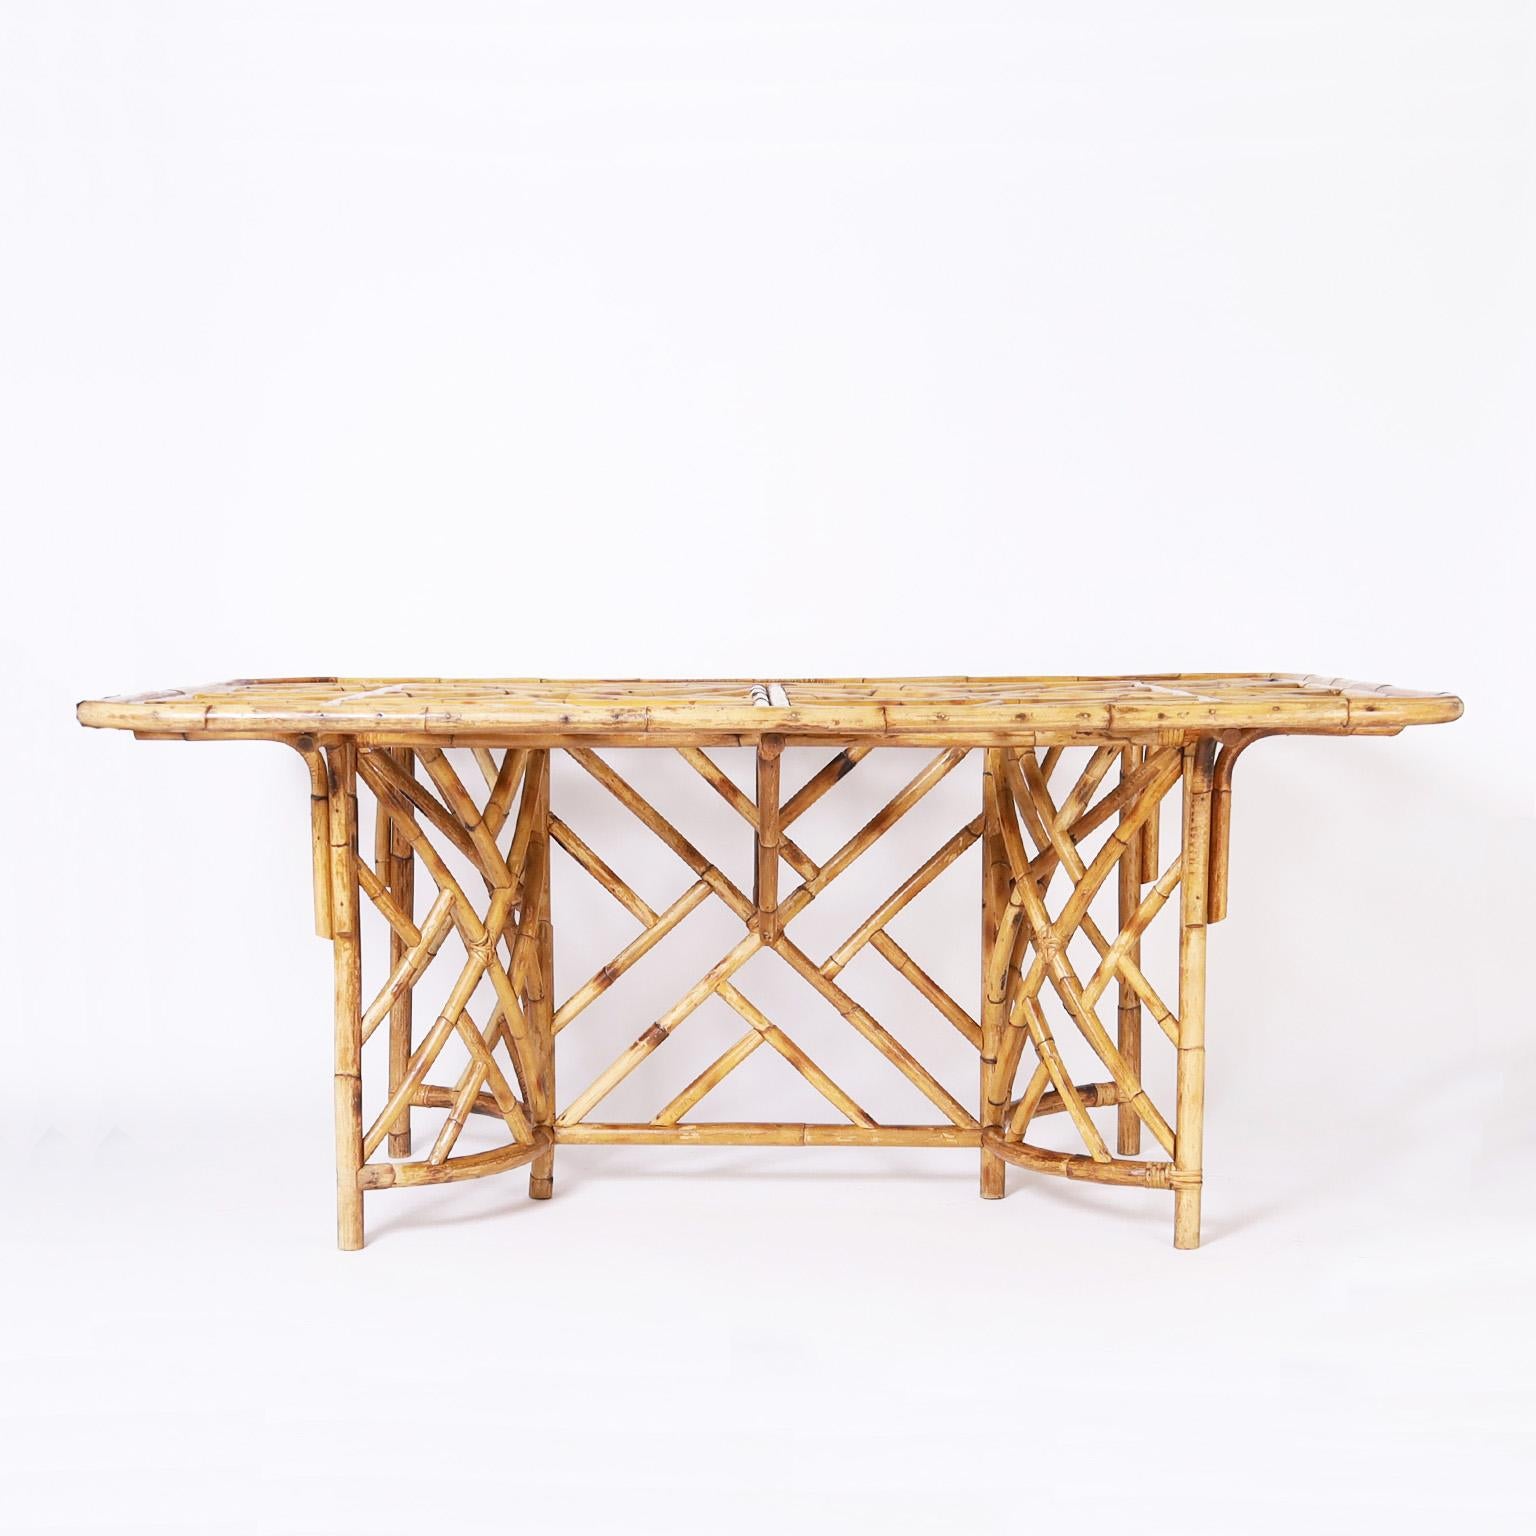 Impressive mid-century table crafted in bamboo and bent bamboo with Chinese Chippendale elements on the top, concave supports and center joining panel. Complete with a glass top. 